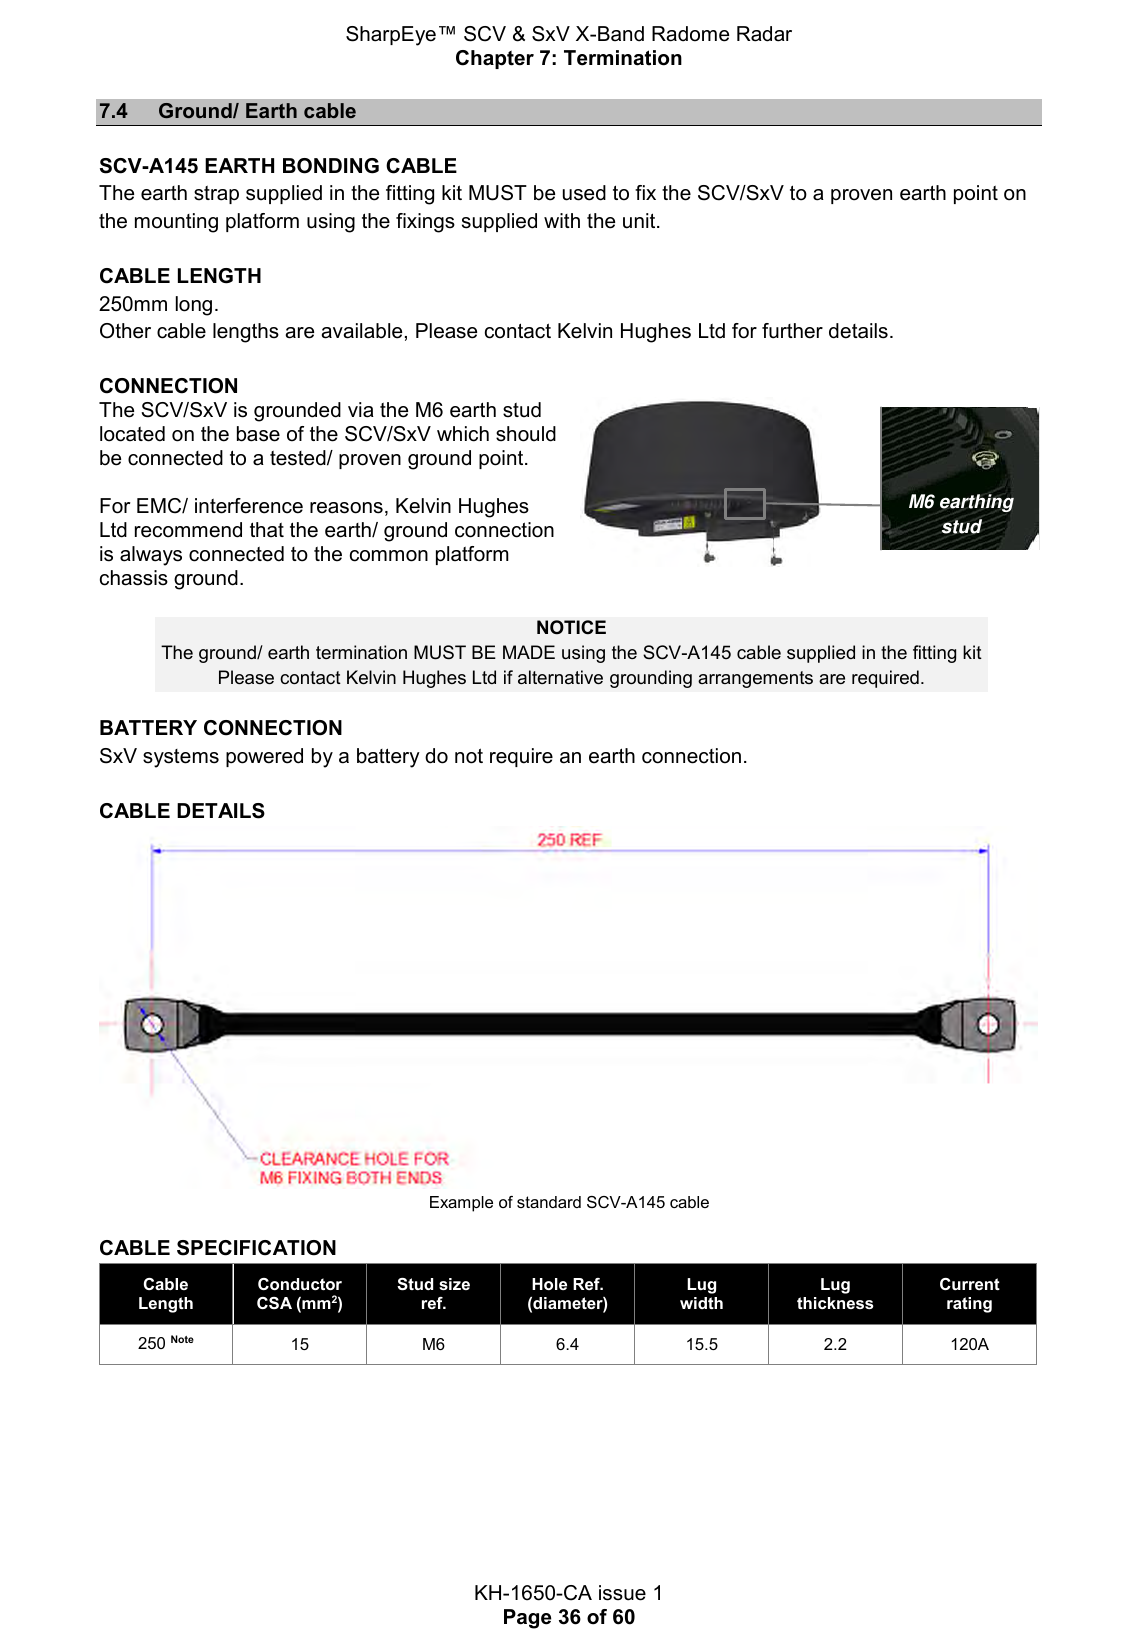 SharpEye™ SCV &amp; SxV X-Band Radome Radar Chapter 7: Termination  KH-1650-CA issue 1 Page 36 of 60 7.4  Ground/ Earth cable  SCV-A145 EARTH BONDING CABLE The earth strap supplied in the fitting kit MUST be used to fix the SCV/SxV to a proven earth point on the mounting platform using the fixings supplied with the unit.   CABLE LENGTH 250mm long.  Other cable lengths are available, Please contact Kelvin Hughes Ltd for further details.  CONNECTION The SCV/SxV is grounded via the M6 earth stud located on the base of the SCV/SxV which should be connected to a tested/ proven ground point.   For EMC/ interference reasons, Kelvin Hughes Ltd recommend that the earth/ ground connection is always connected to the common platform chassis ground.     NOTICE The ground/ earth termination MUST BE MADE using the SCV-A145 cable supplied in the fitting kit Please contact Kelvin Hughes Ltd if alternative grounding arrangements are required. BATTERY CONNECTION SxV systems powered by a battery do not require an earth connection.  CABLE DETAILS  Example of standard SCV-A145 cable CABLE SPECIFICATION Cable Length Conductor CSA (mm2) Stud size ref. Hole Ref. (diameter) Lug width Lug thickness Current rating 250 Note 15 M6 6.4 15.5 2.2 120A     M6 earthing stud 